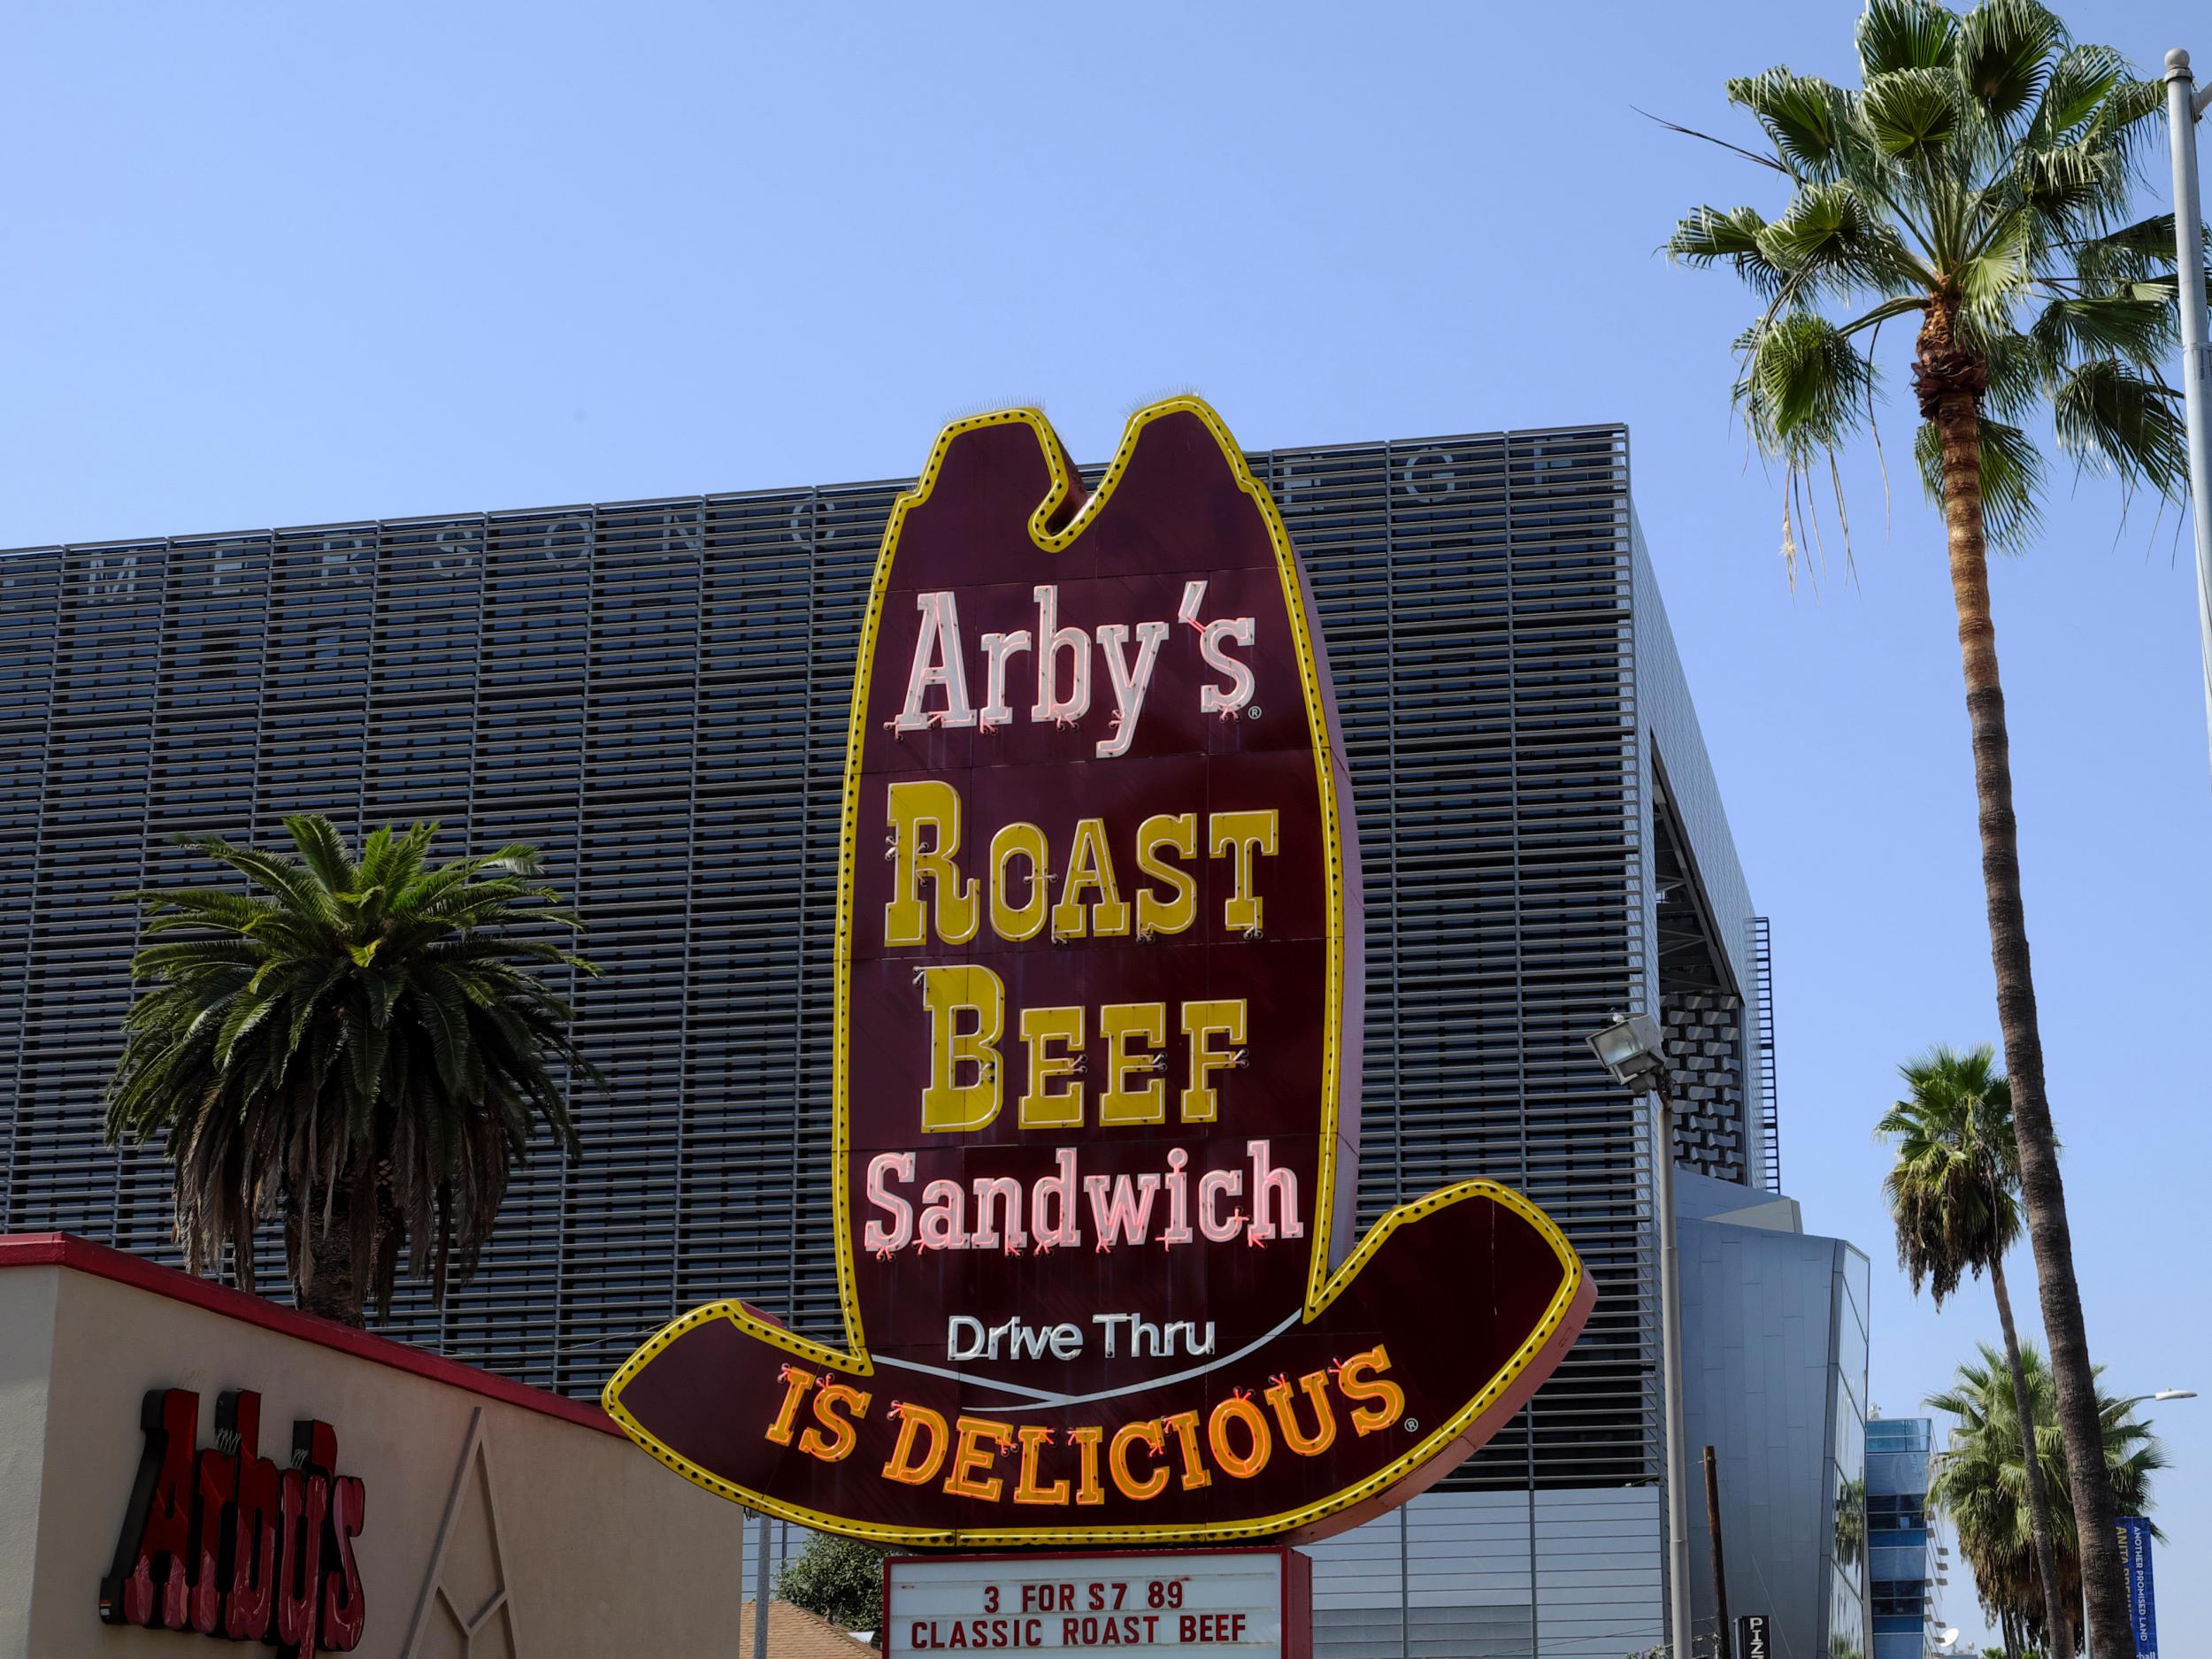 Arby’s, known for its roast beef, is set to experiment with lamb dishes